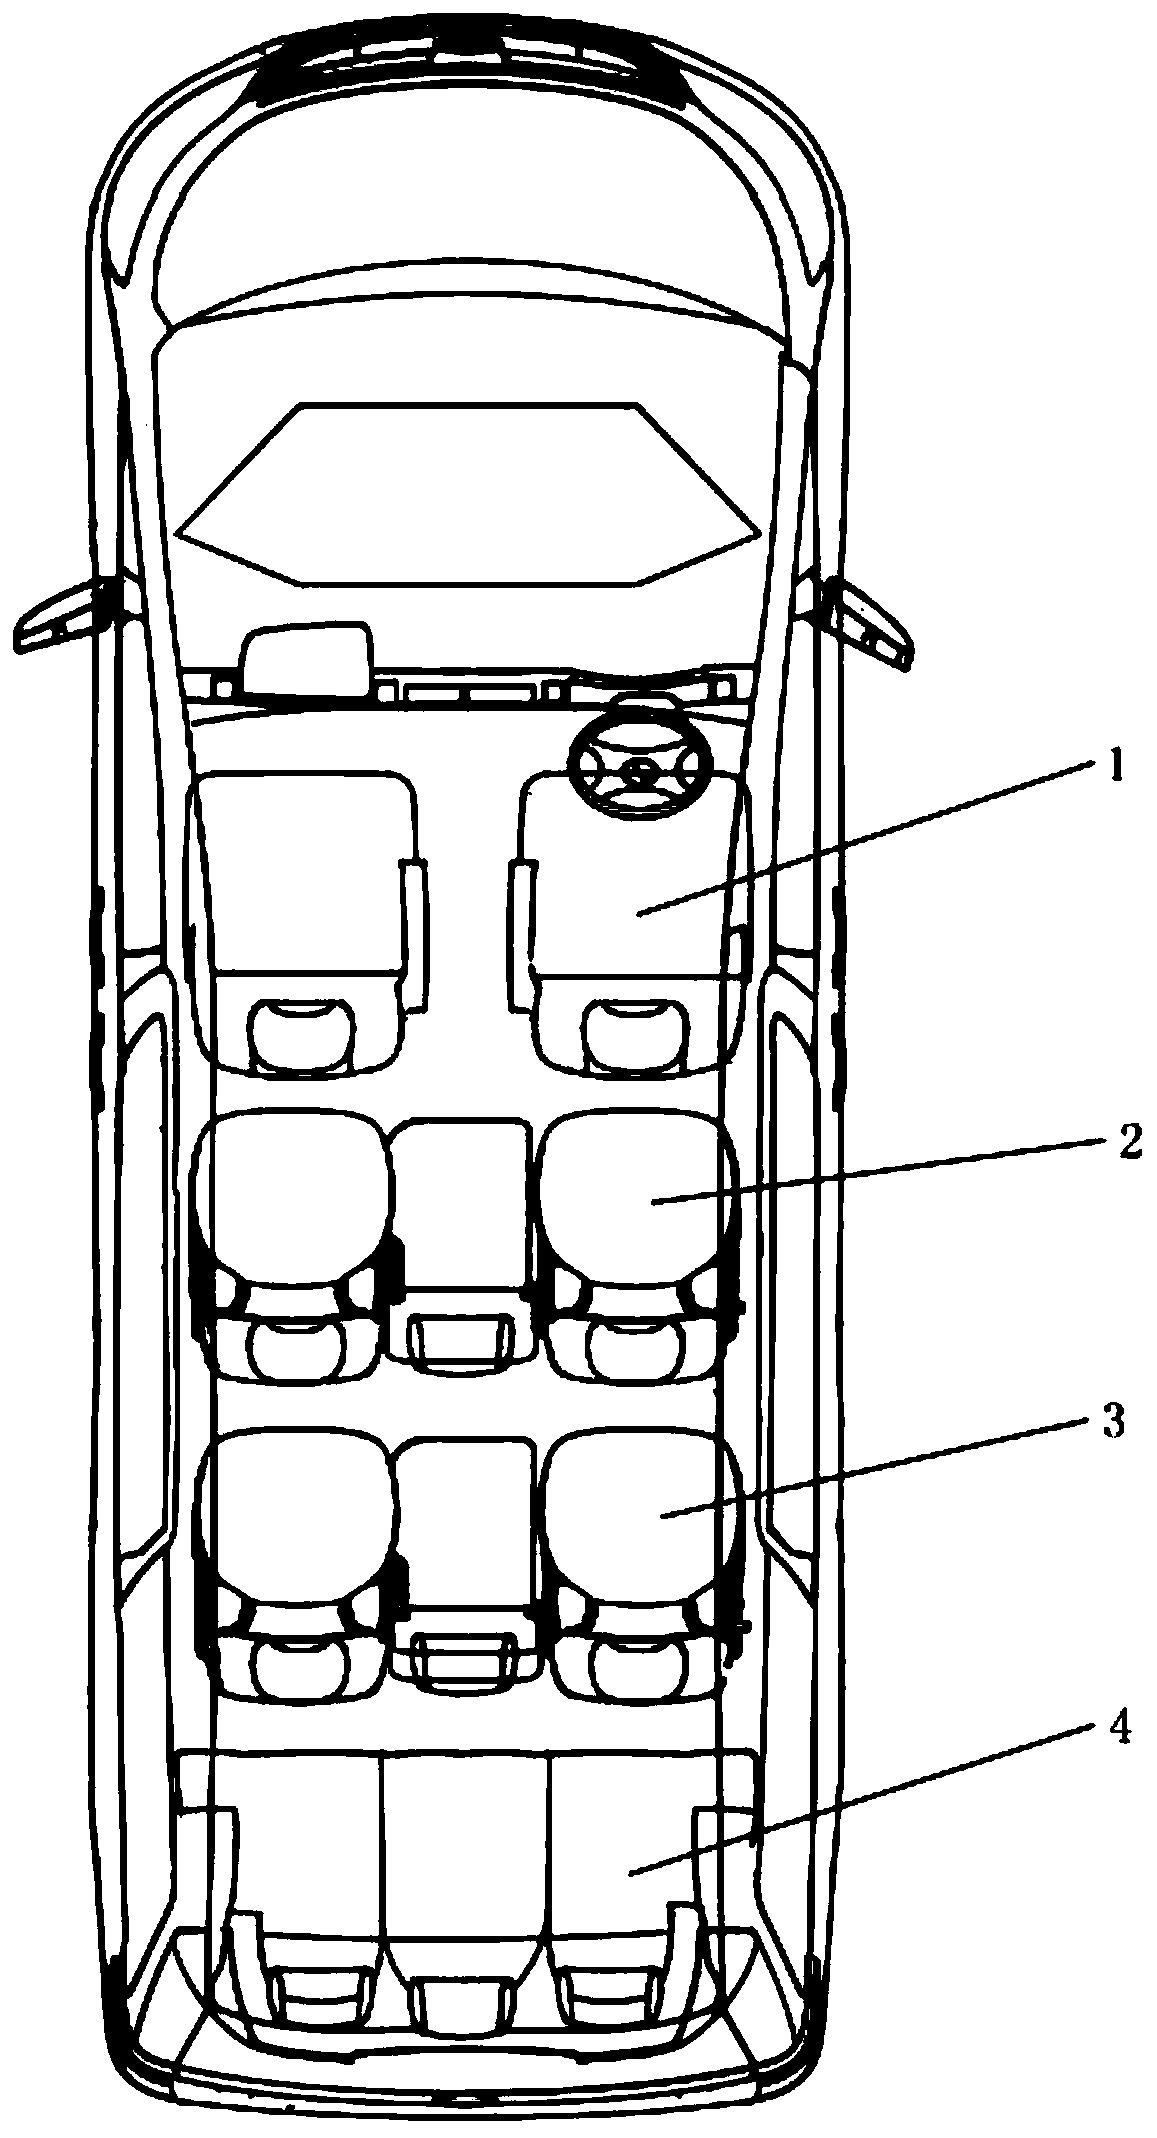 11-seat seat system for passenger car